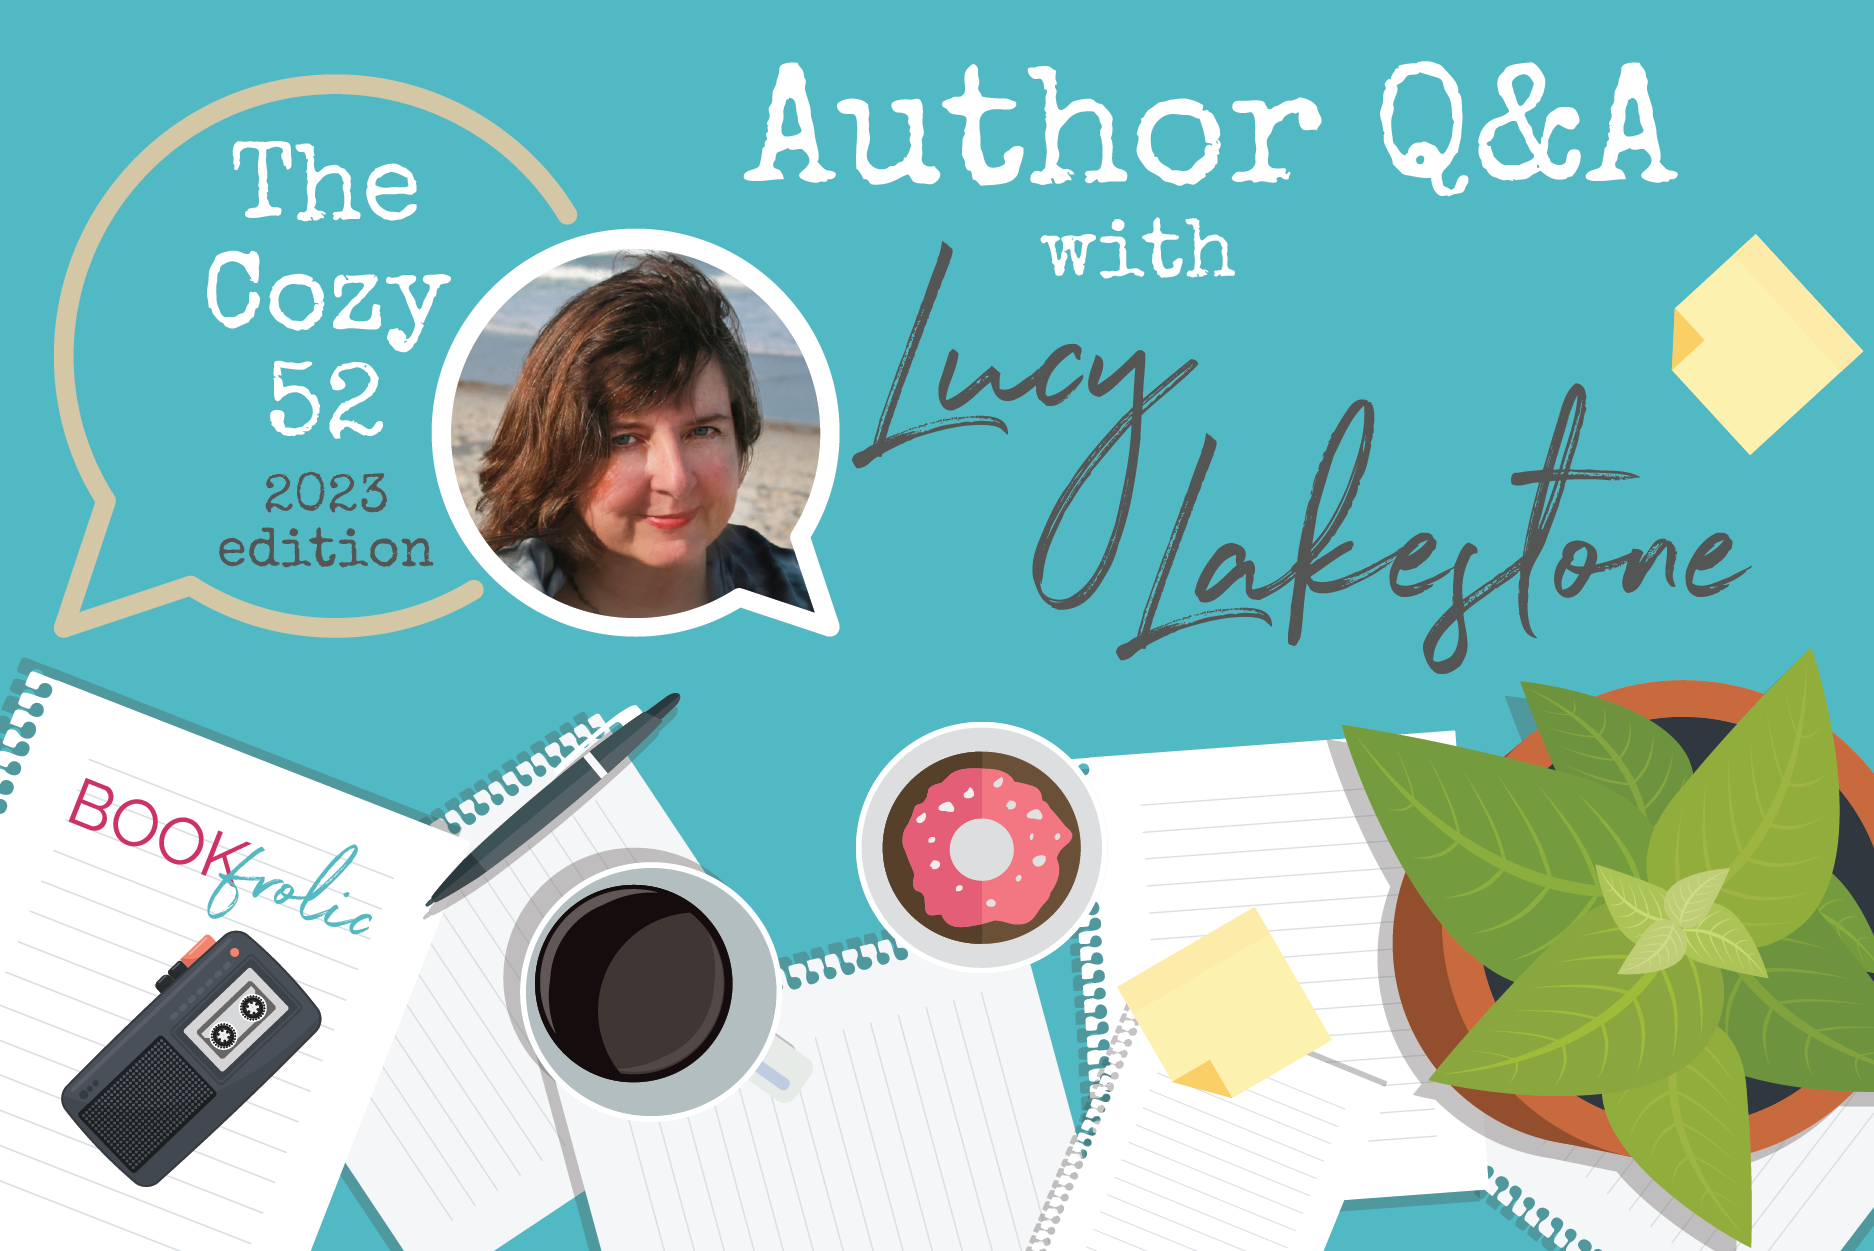 banner for author interview with Lucy Lakestone